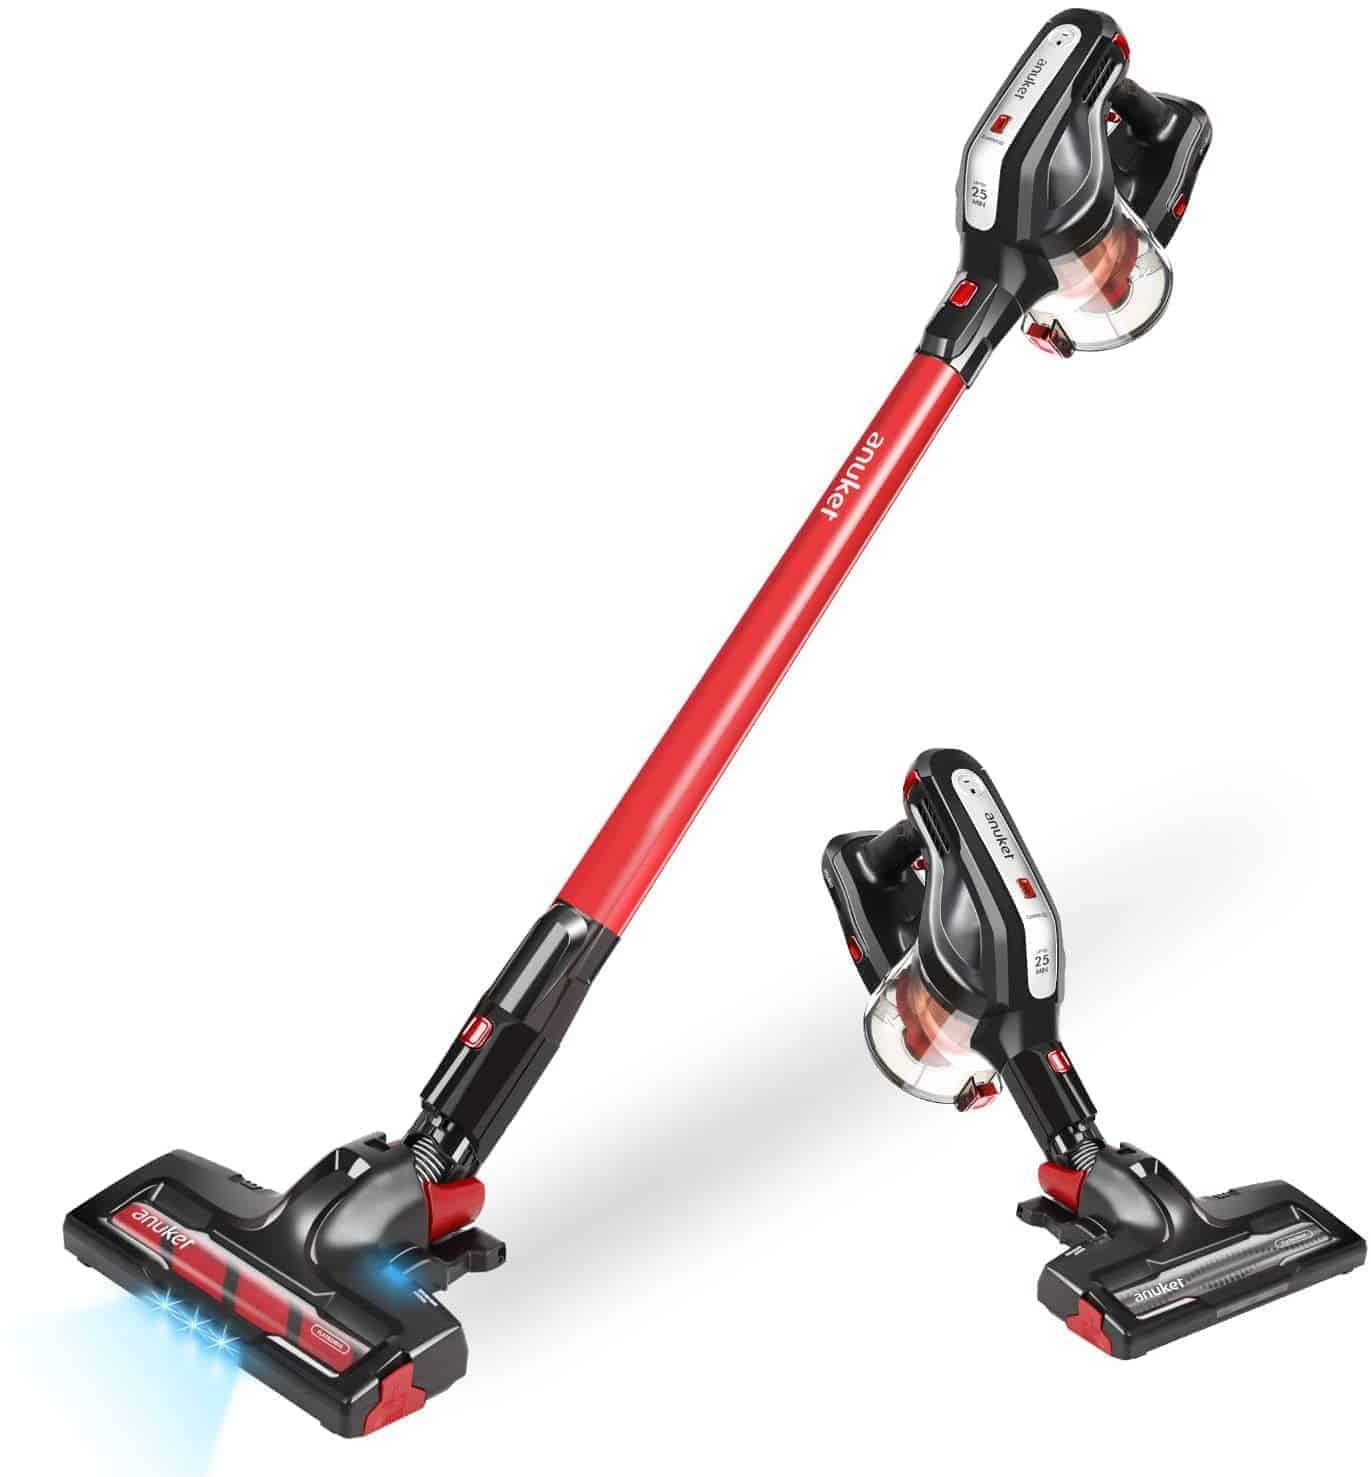 Best 2 in 1 handheld stick vacuum with flexible brushes: Anuker Cordless